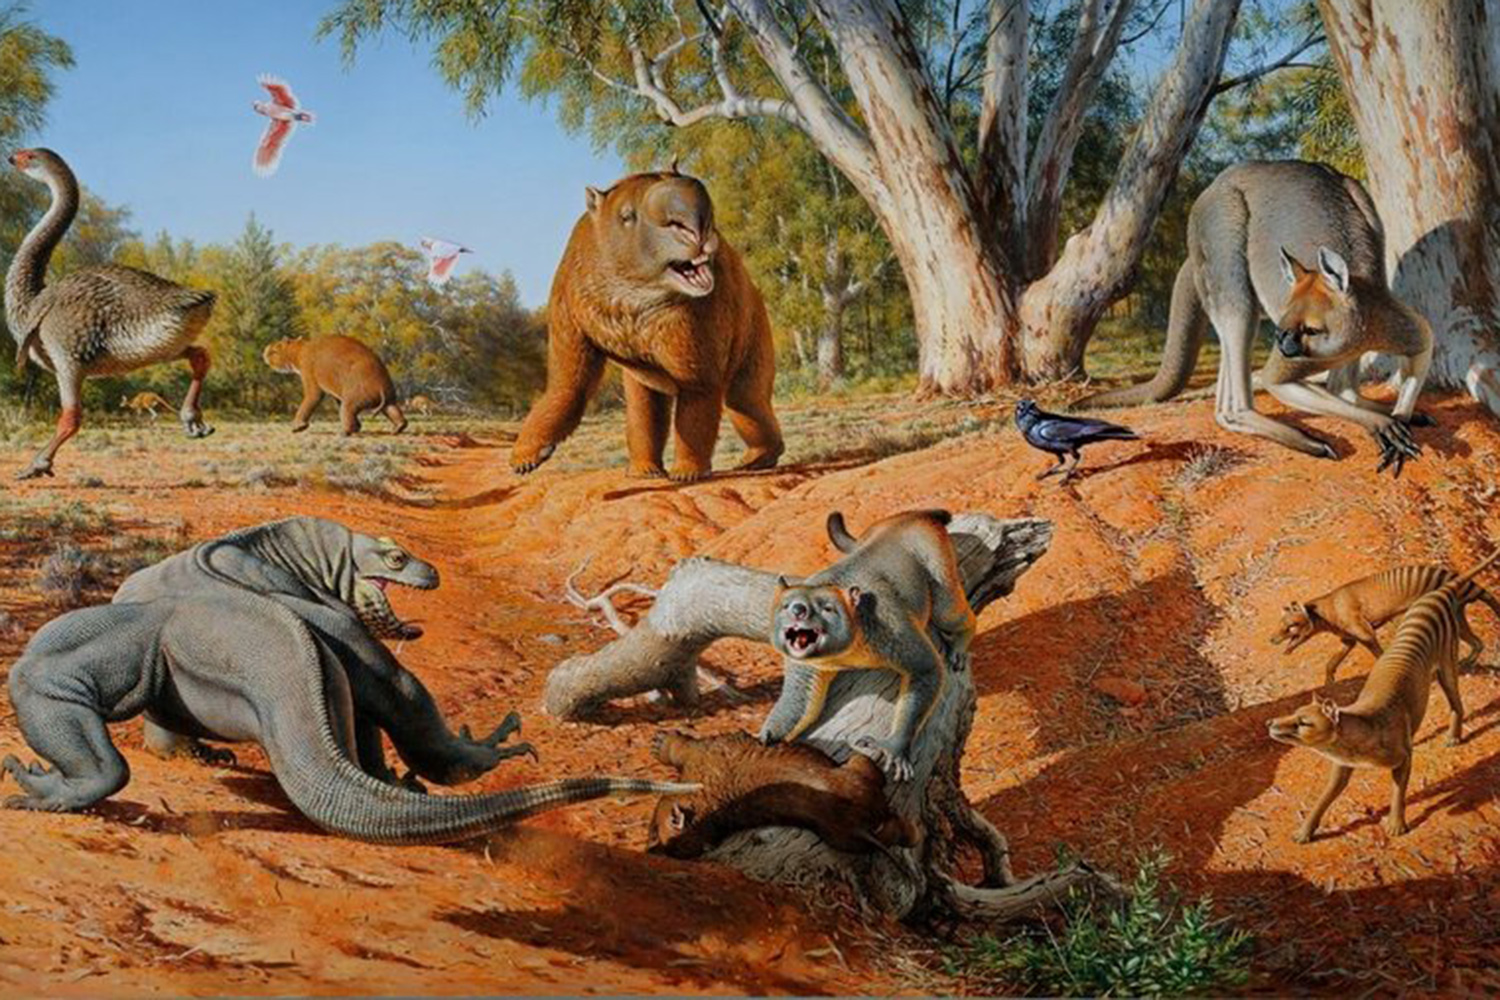 Illustration of a range of now-extinct megafauna that were present when humans first arrived in Australia (by Peter Trusler).